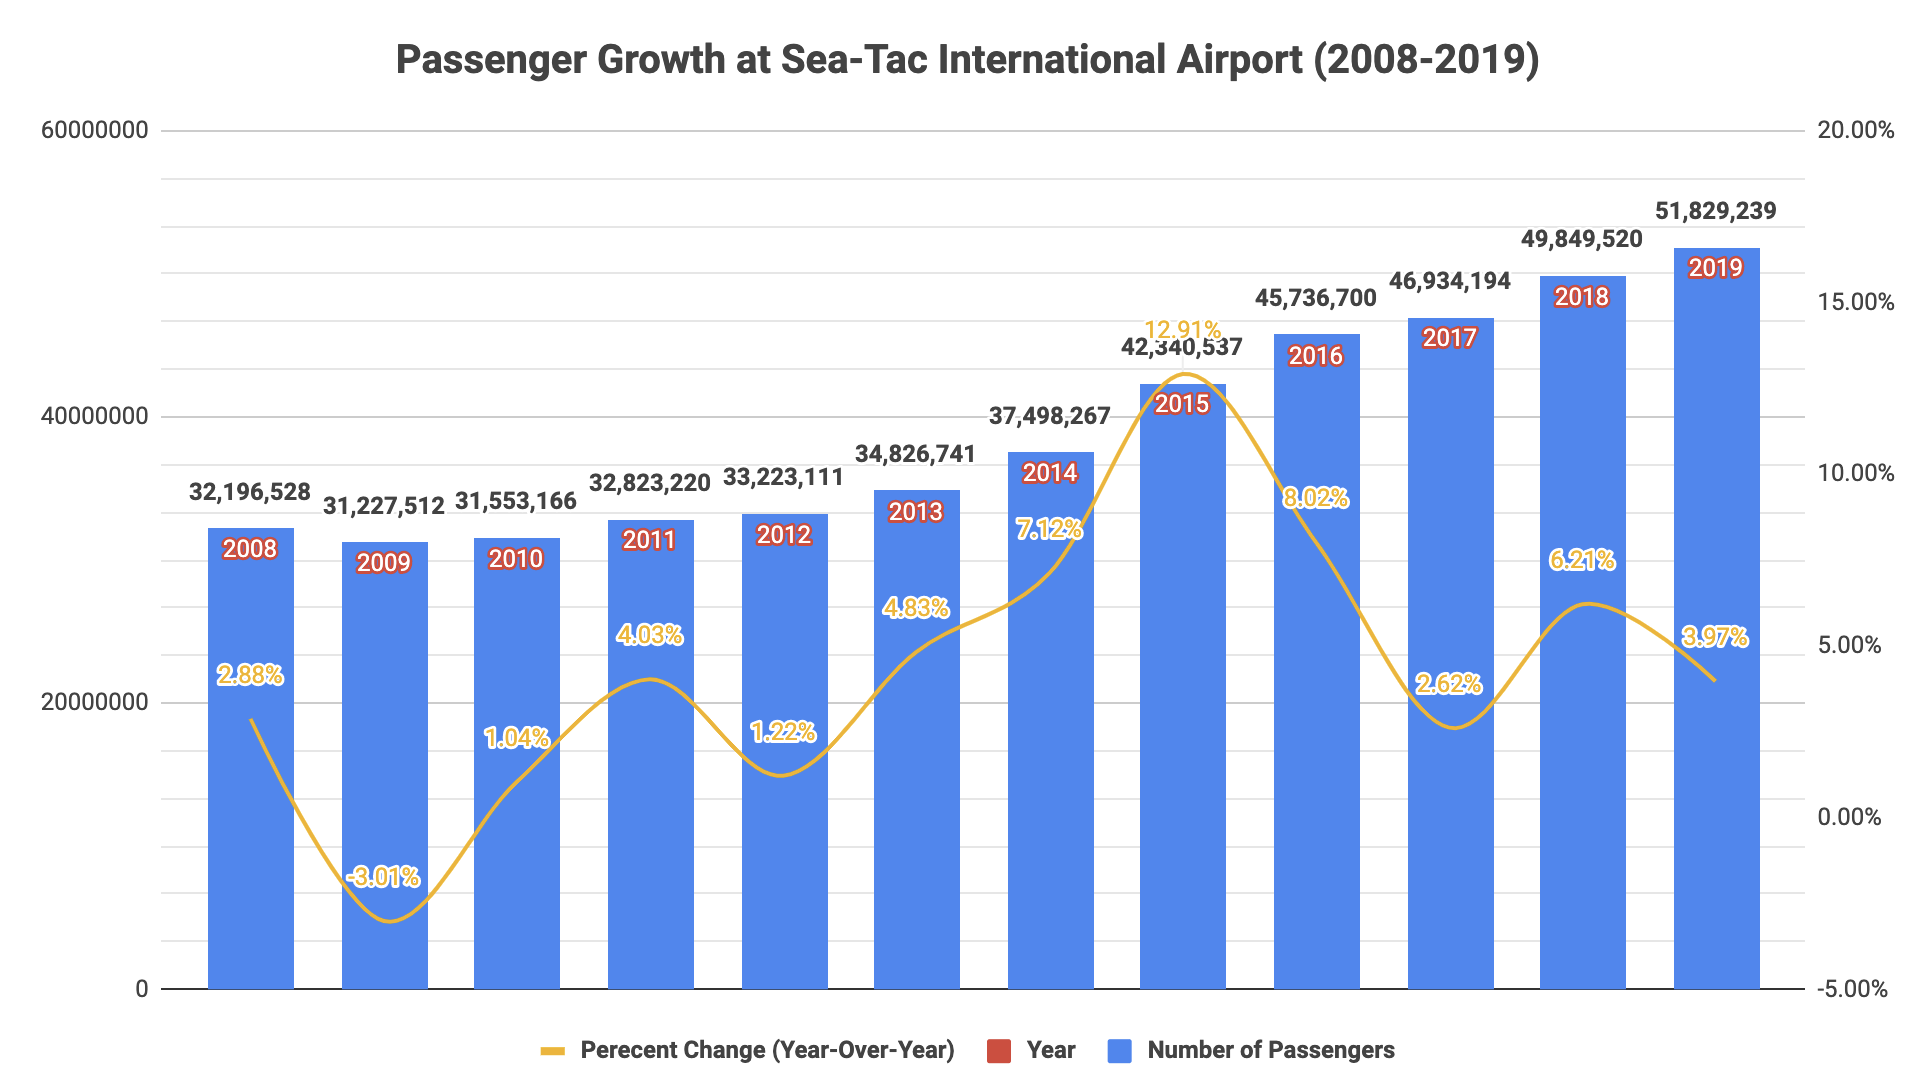 Passenger growth was modest at Sea-Tac International Airport in 2019, leading to more than 50 million passengers in a single year.﻿